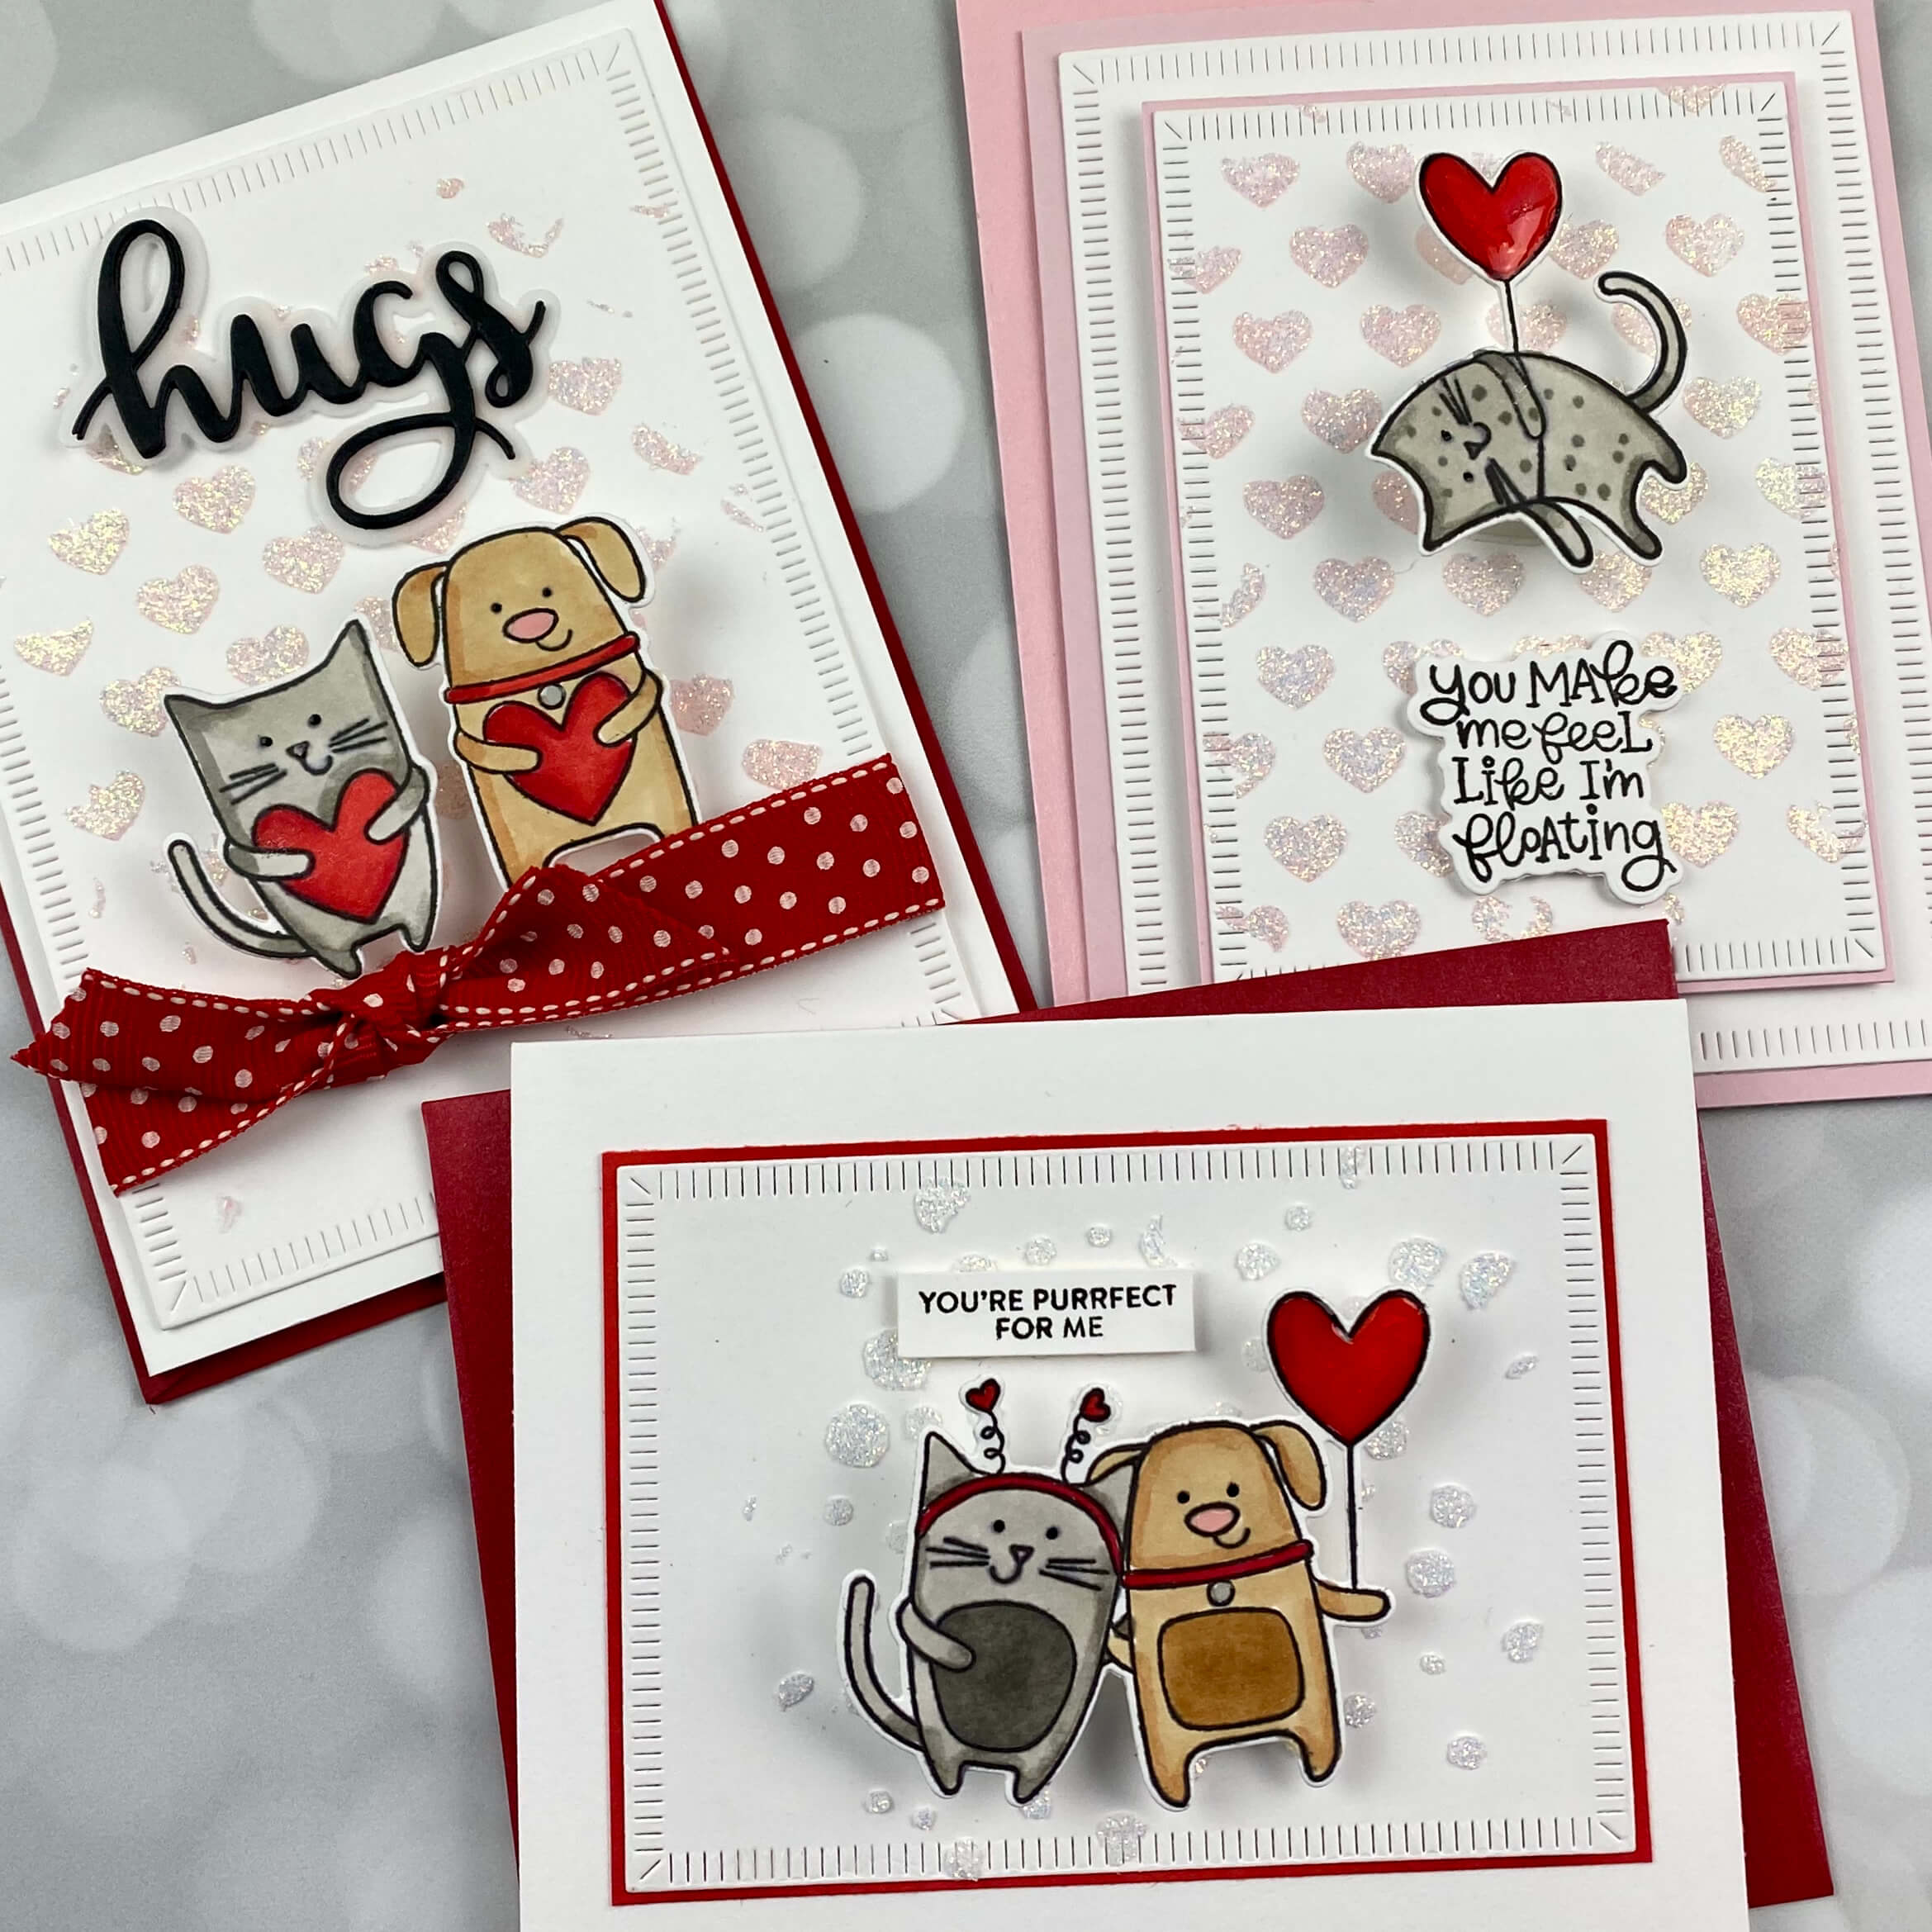 hand made cards with hand colored cats and dogs that shake